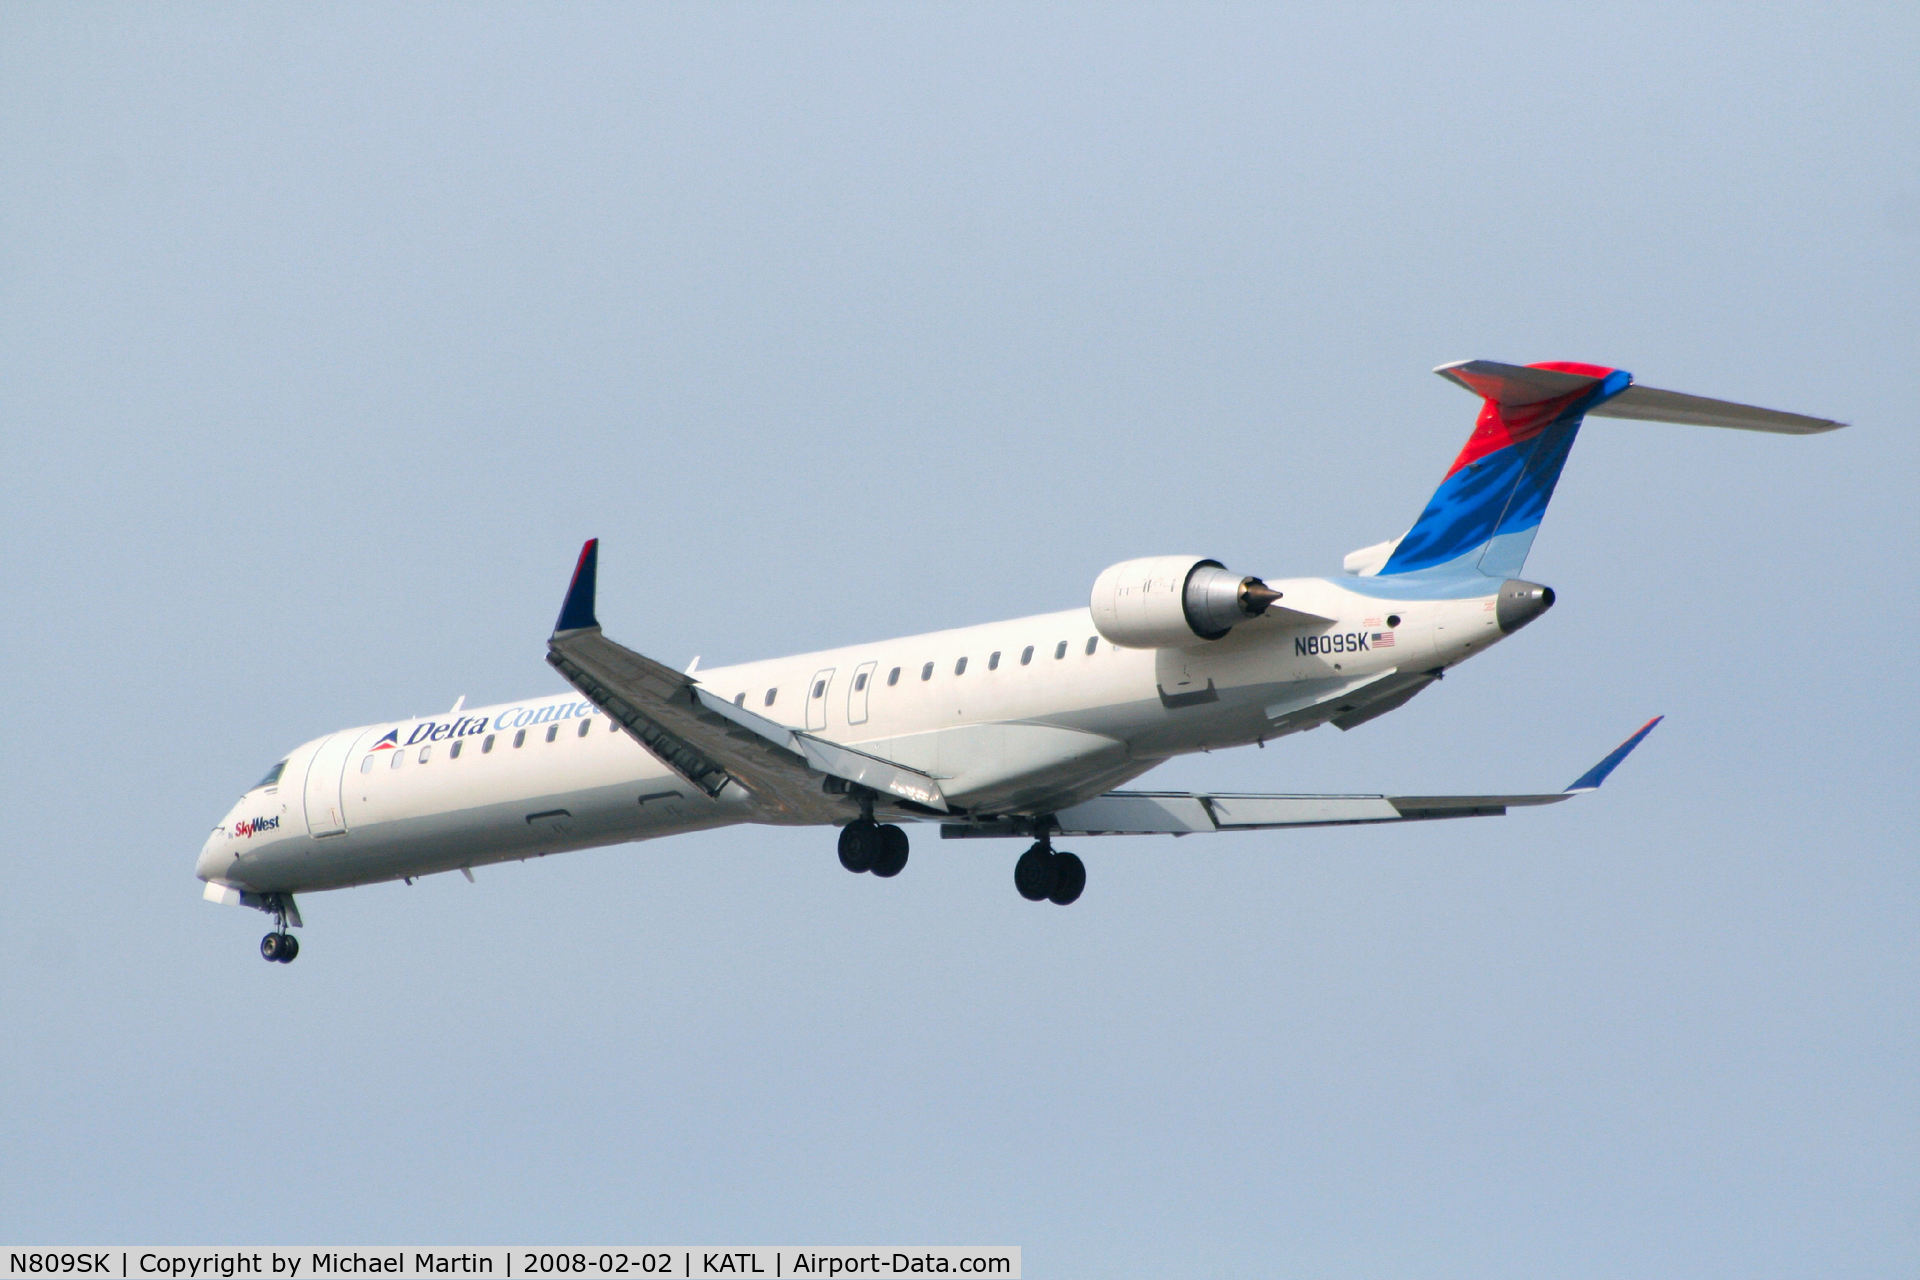 N809SK, 2006 Bombardier CRJ-900ER (CL-600-2D24) C/N 15086, Over the numbers of 26R